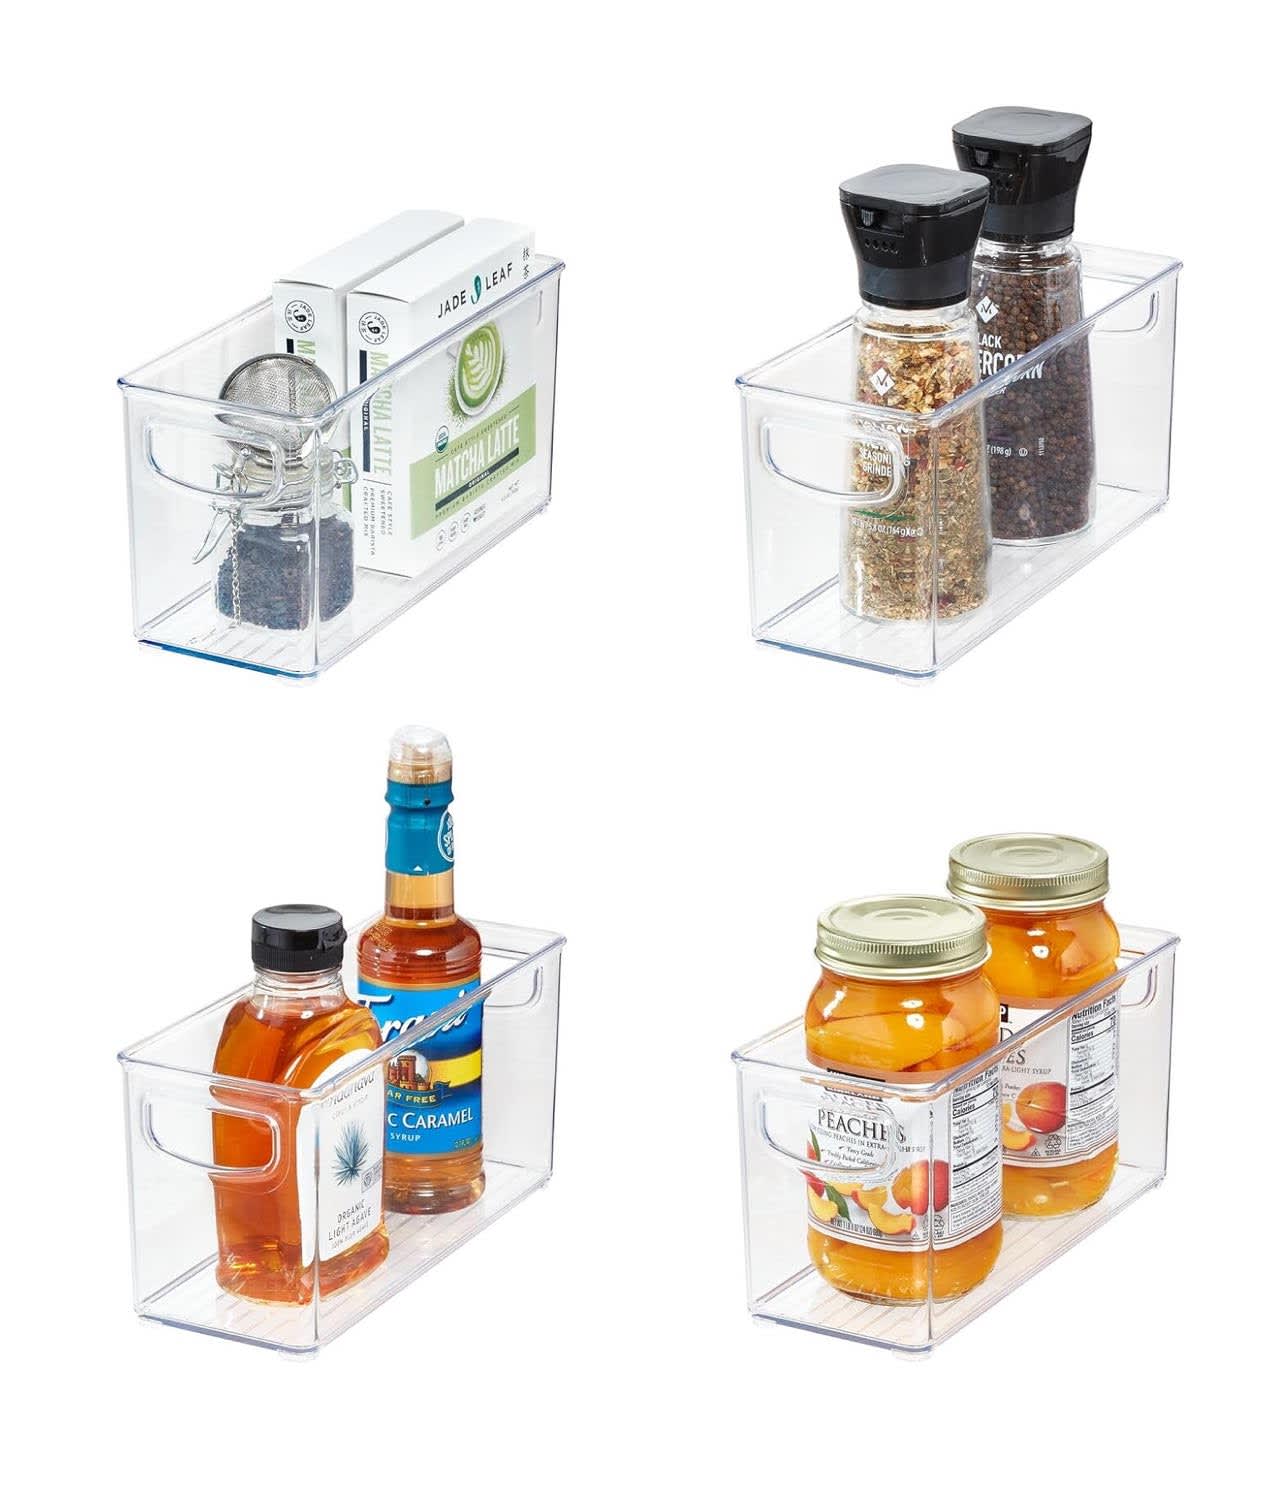 Stackable Storage Bins for Stress-Free Organizing